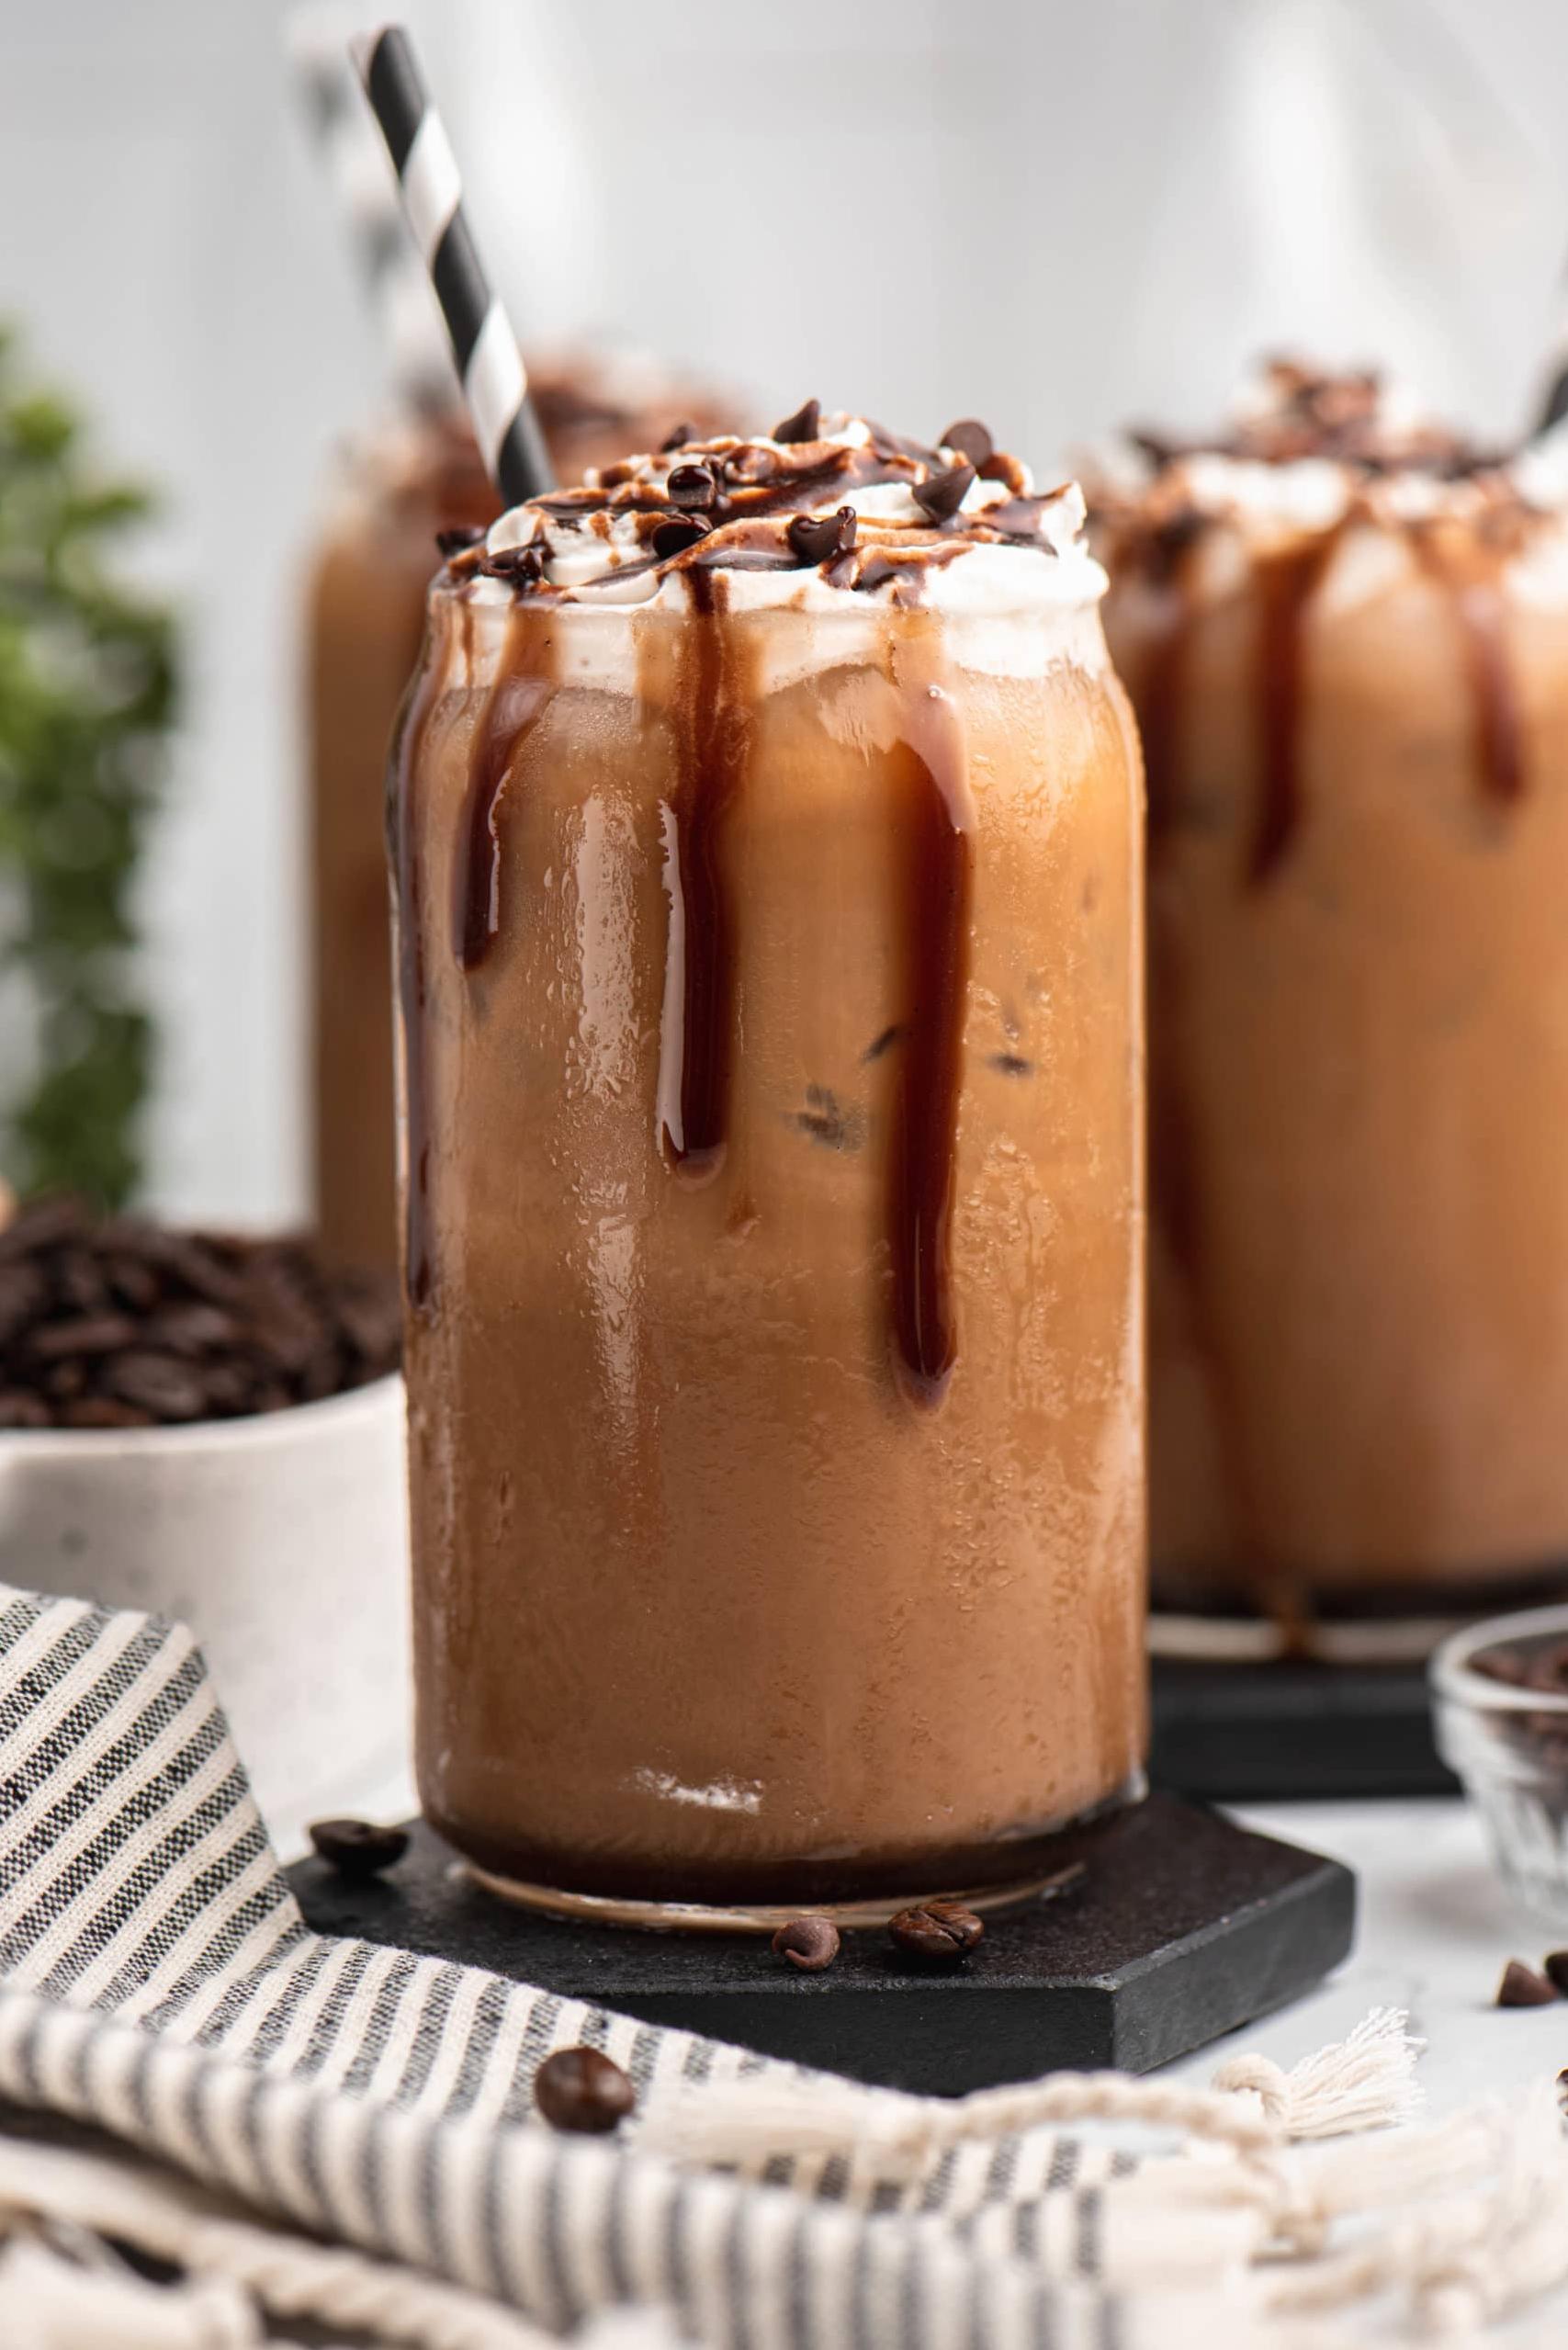  Beat the summer heat with this iced version of the classic mocha.